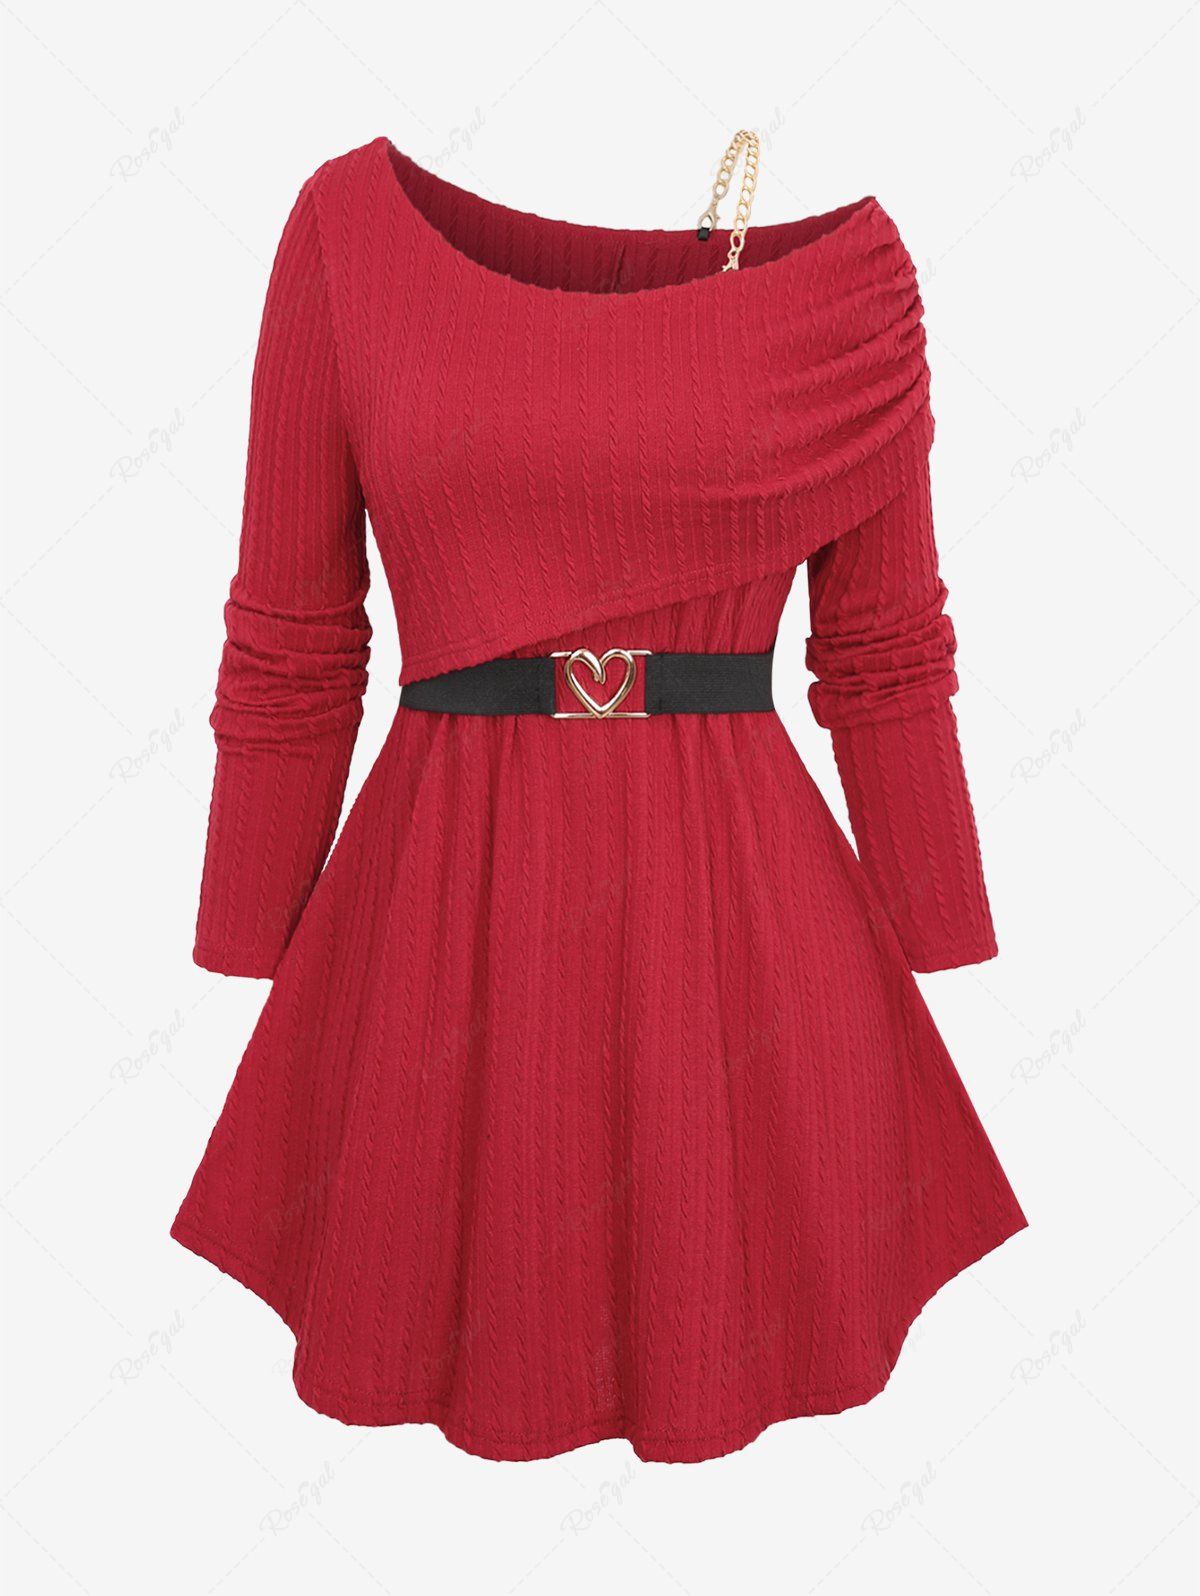 Fancy Plus Size One Shoulder Textured Ribbed Cinched Solid Long Sleeves Knit Top with Removeble Chain and Heart Buckle Belt  